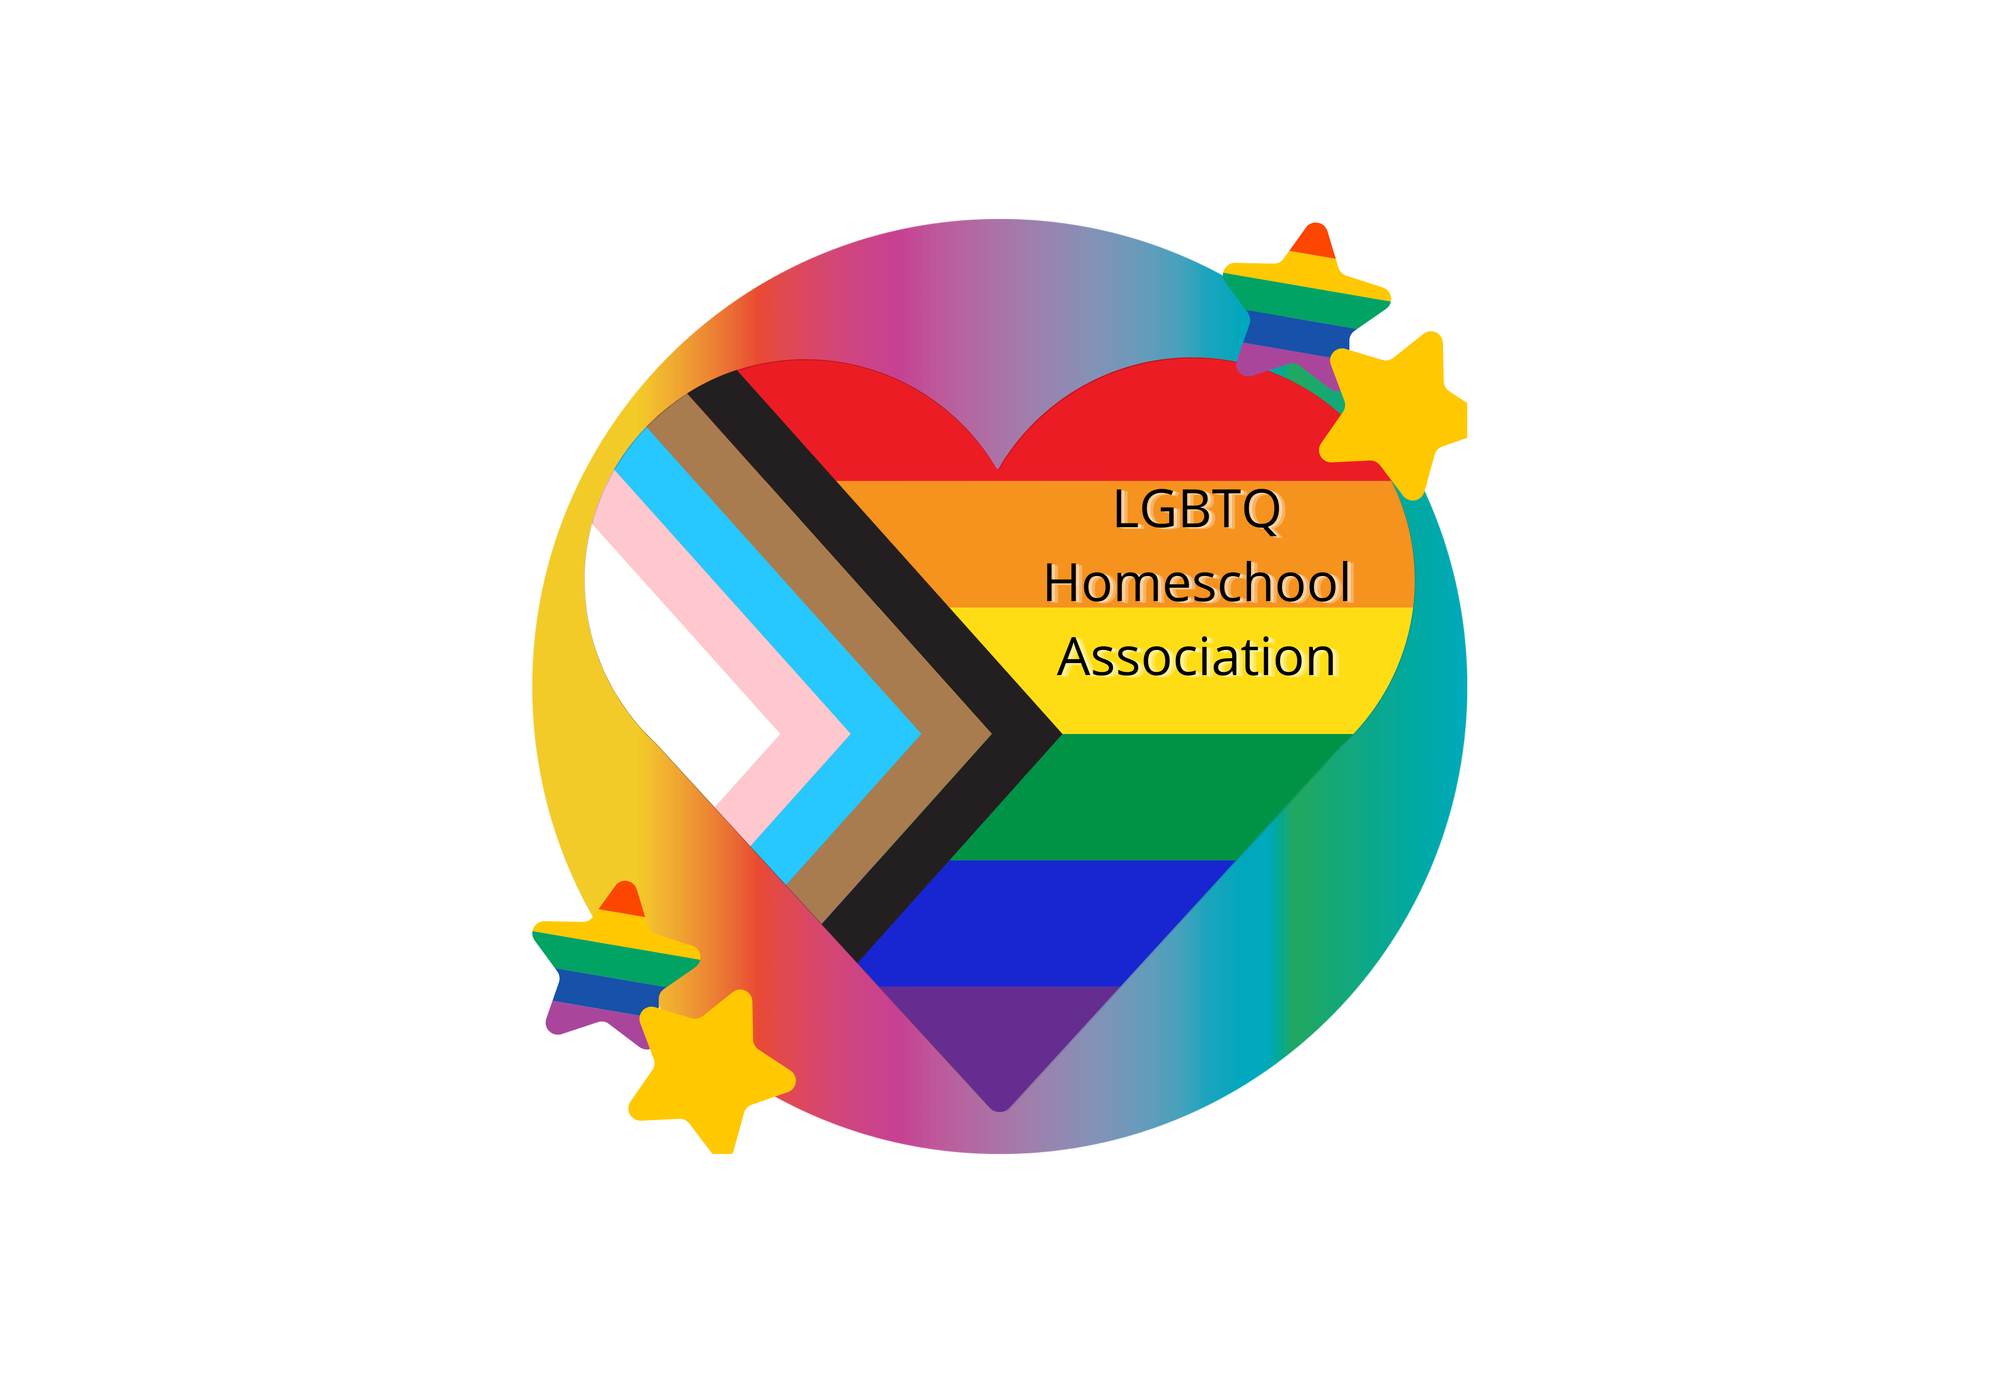 Where All Humans Are Valued - LGBTQ Homeschool Association